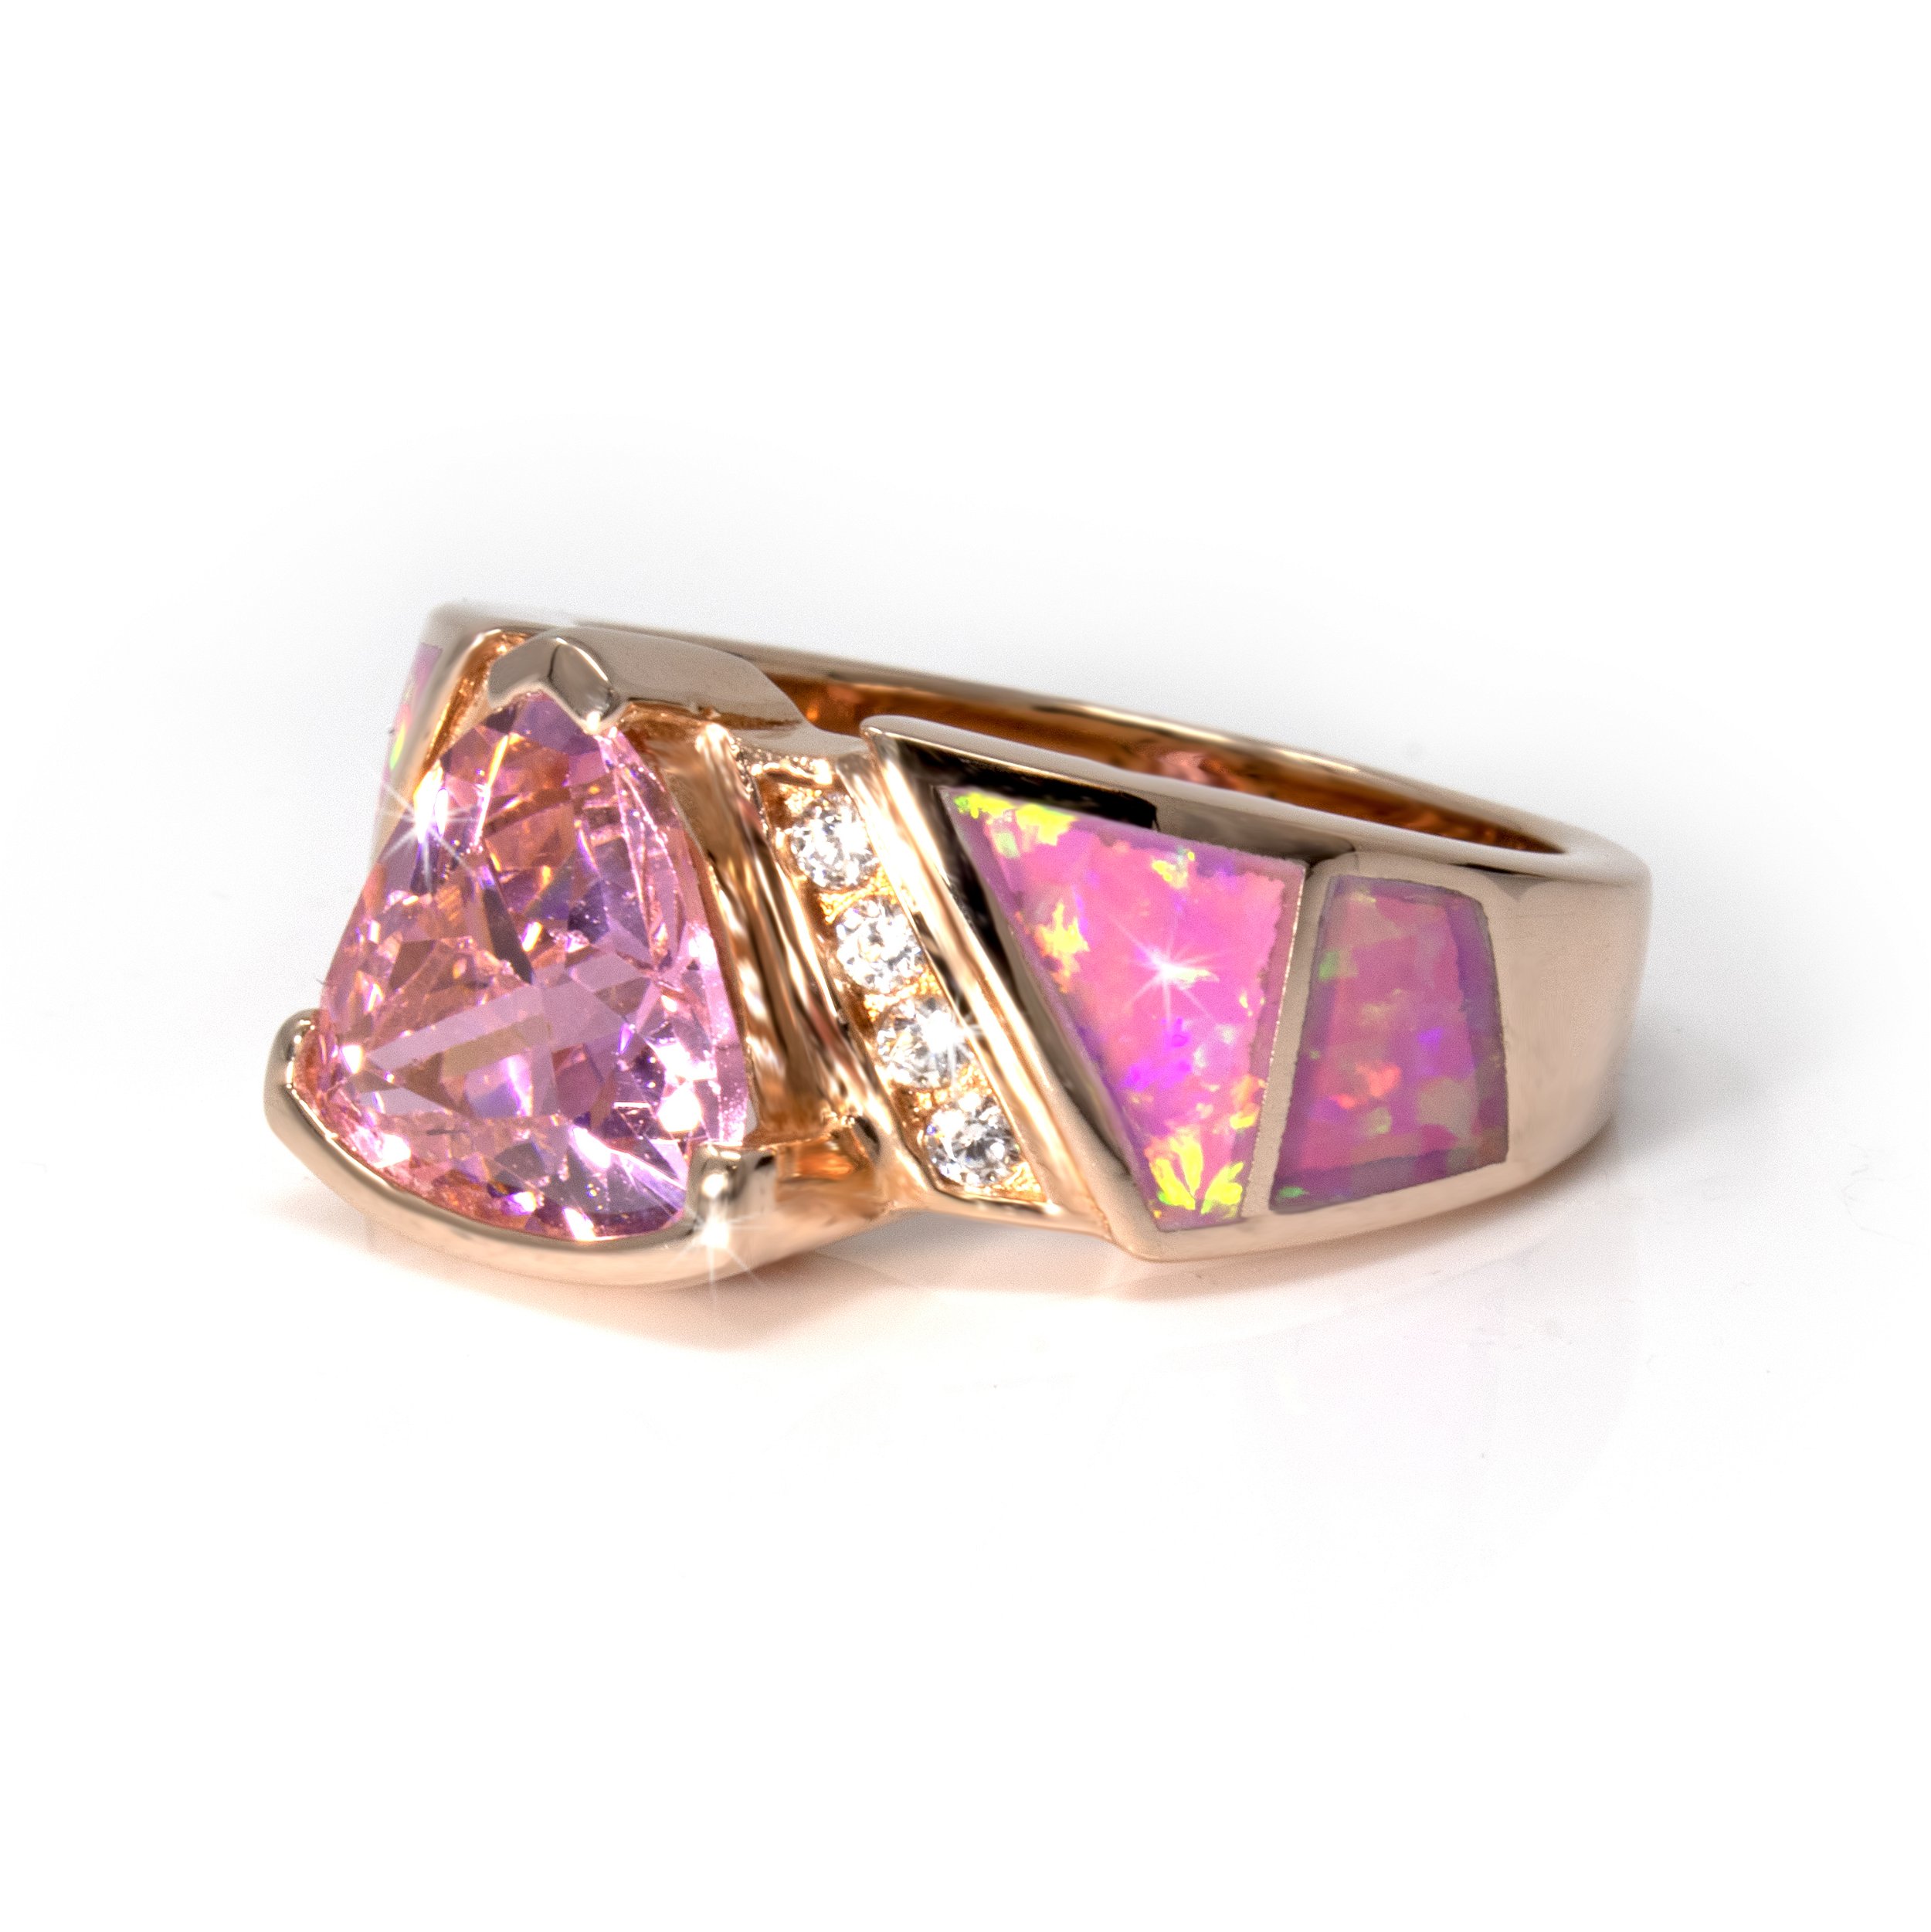 Pink Opal Ring with Rose Gold Overlay Size 6 - Inlaid Top Band With Pink Cz Trillion Set In Raised Sterling Silver Half Bezel & 2 White Cz Trios On Side